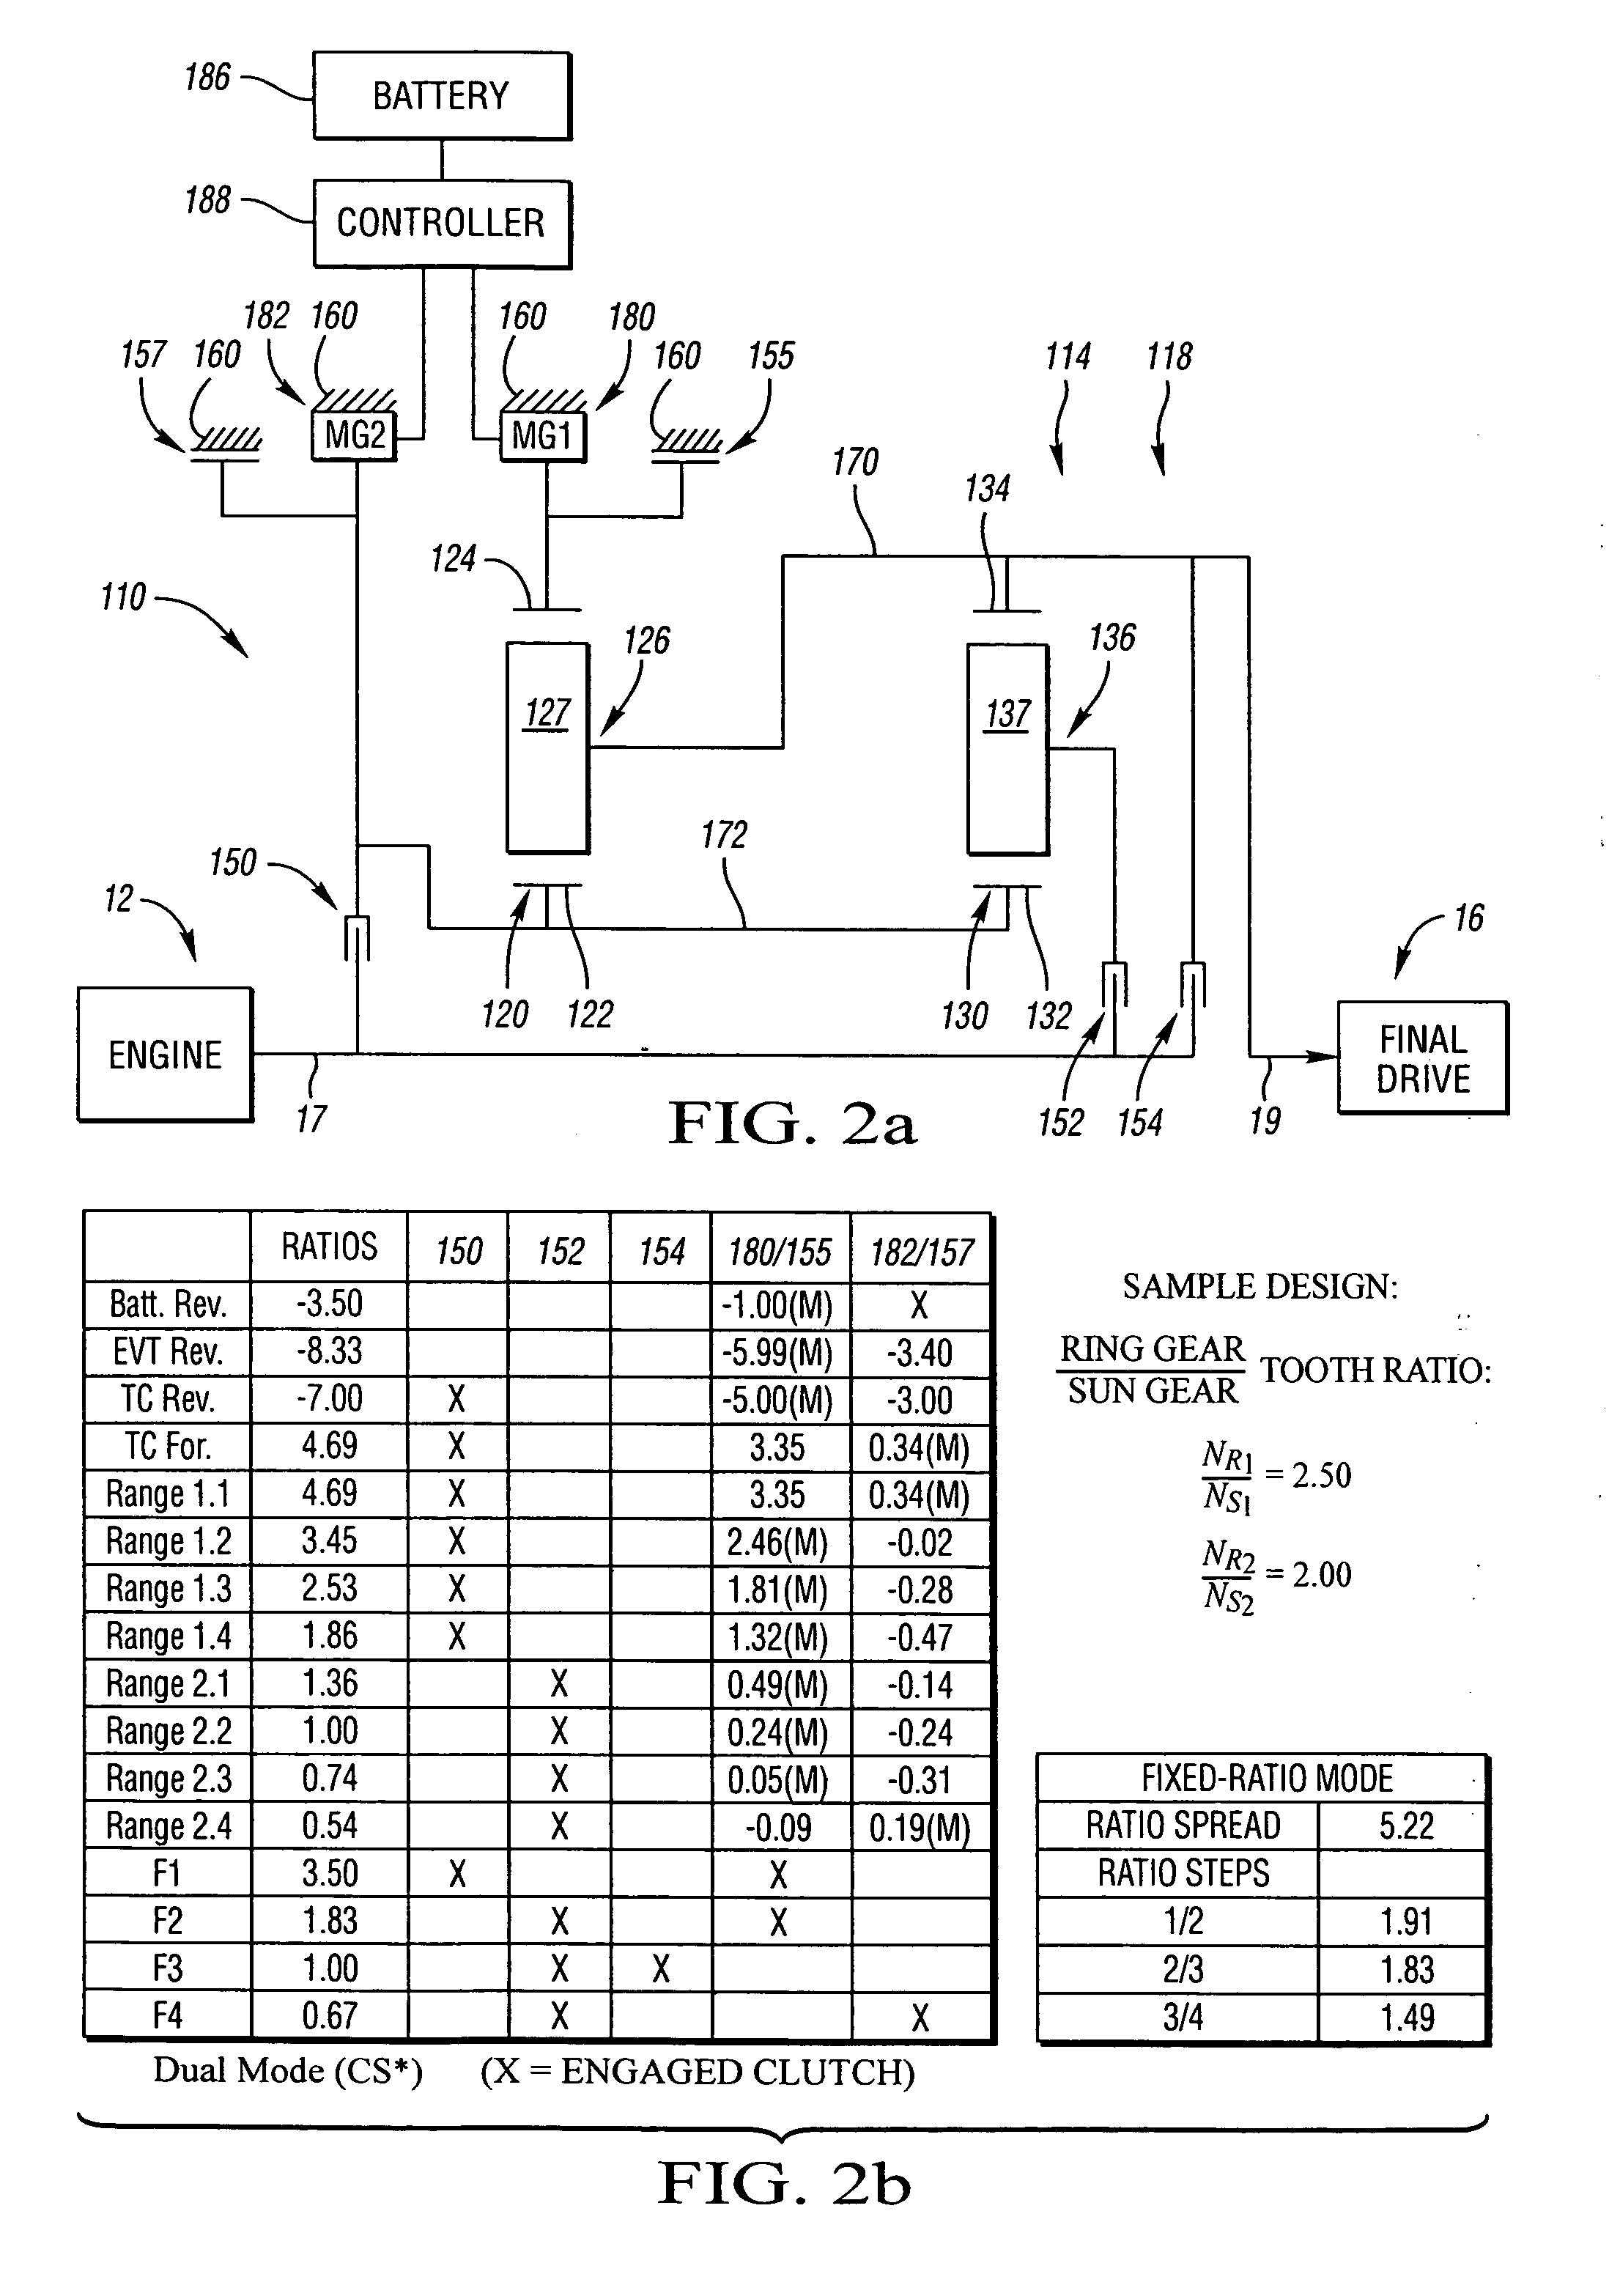 Electrically variable transmission having two planetary gear sets with two fixed interconnections and clutch input